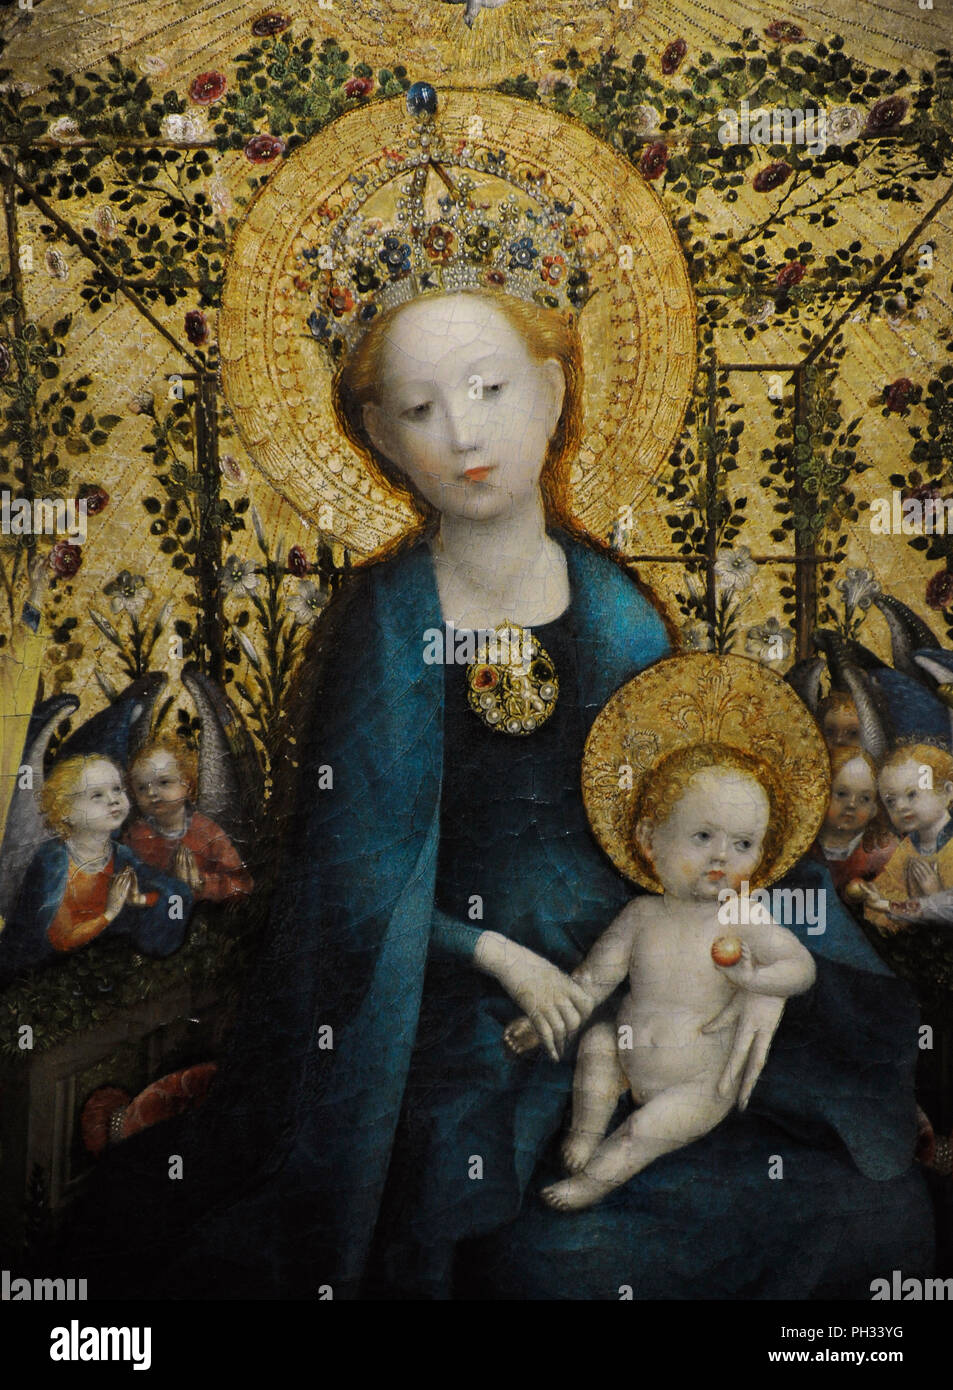 Stefan Lochner (ca. 1400/1410-1451). German painter. Madonna in the Rose Bower, ca.1440-1442. Detail. Wallraf-Richartz Museum. Cologne. Germany. Stock Photo